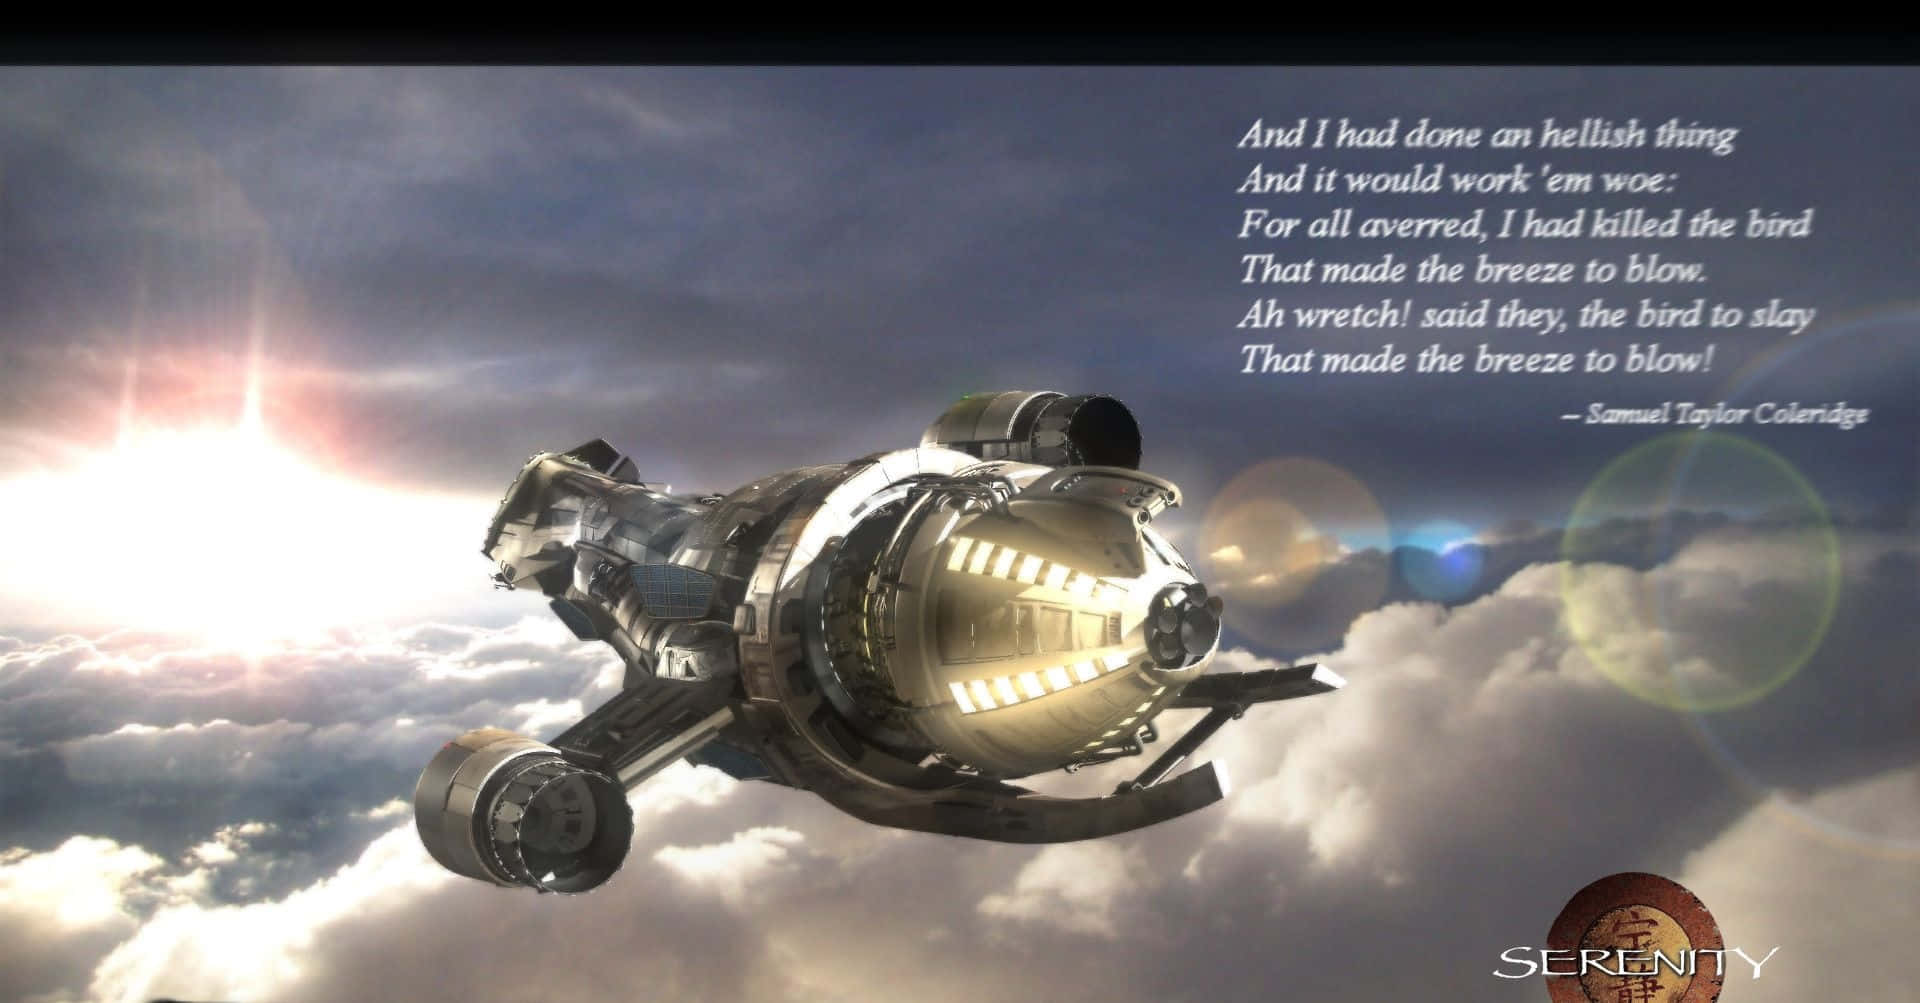 TV Show Firefly The Serenity Wallpaper